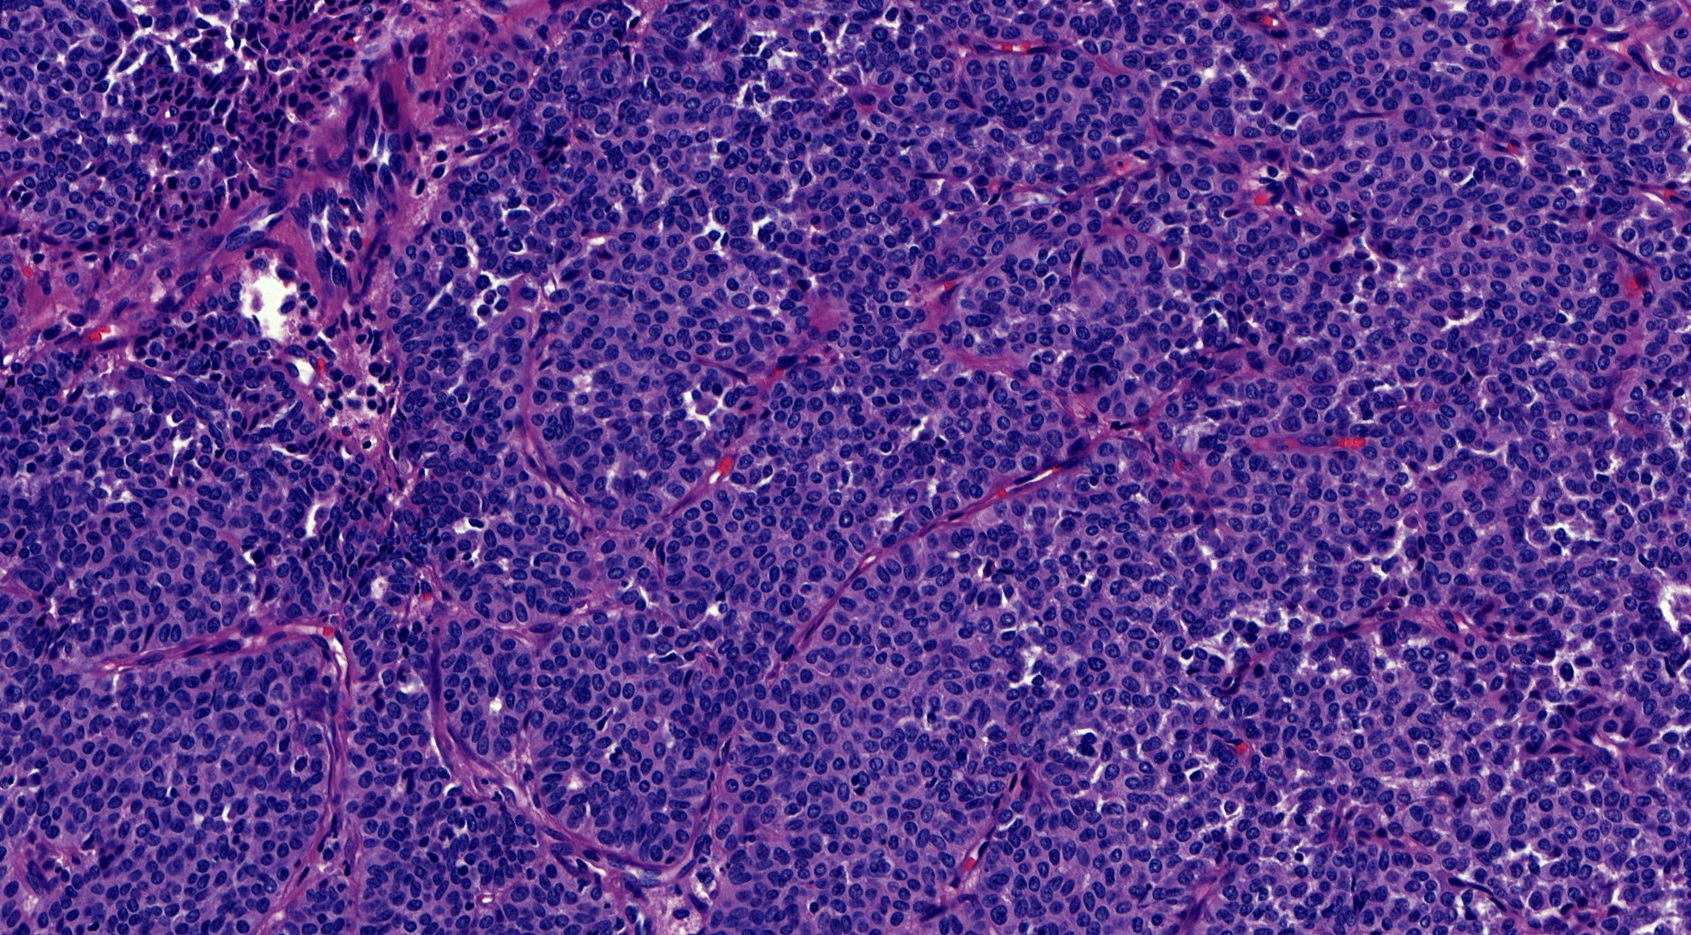 Fibrovascular cores within  epithelial proliferation